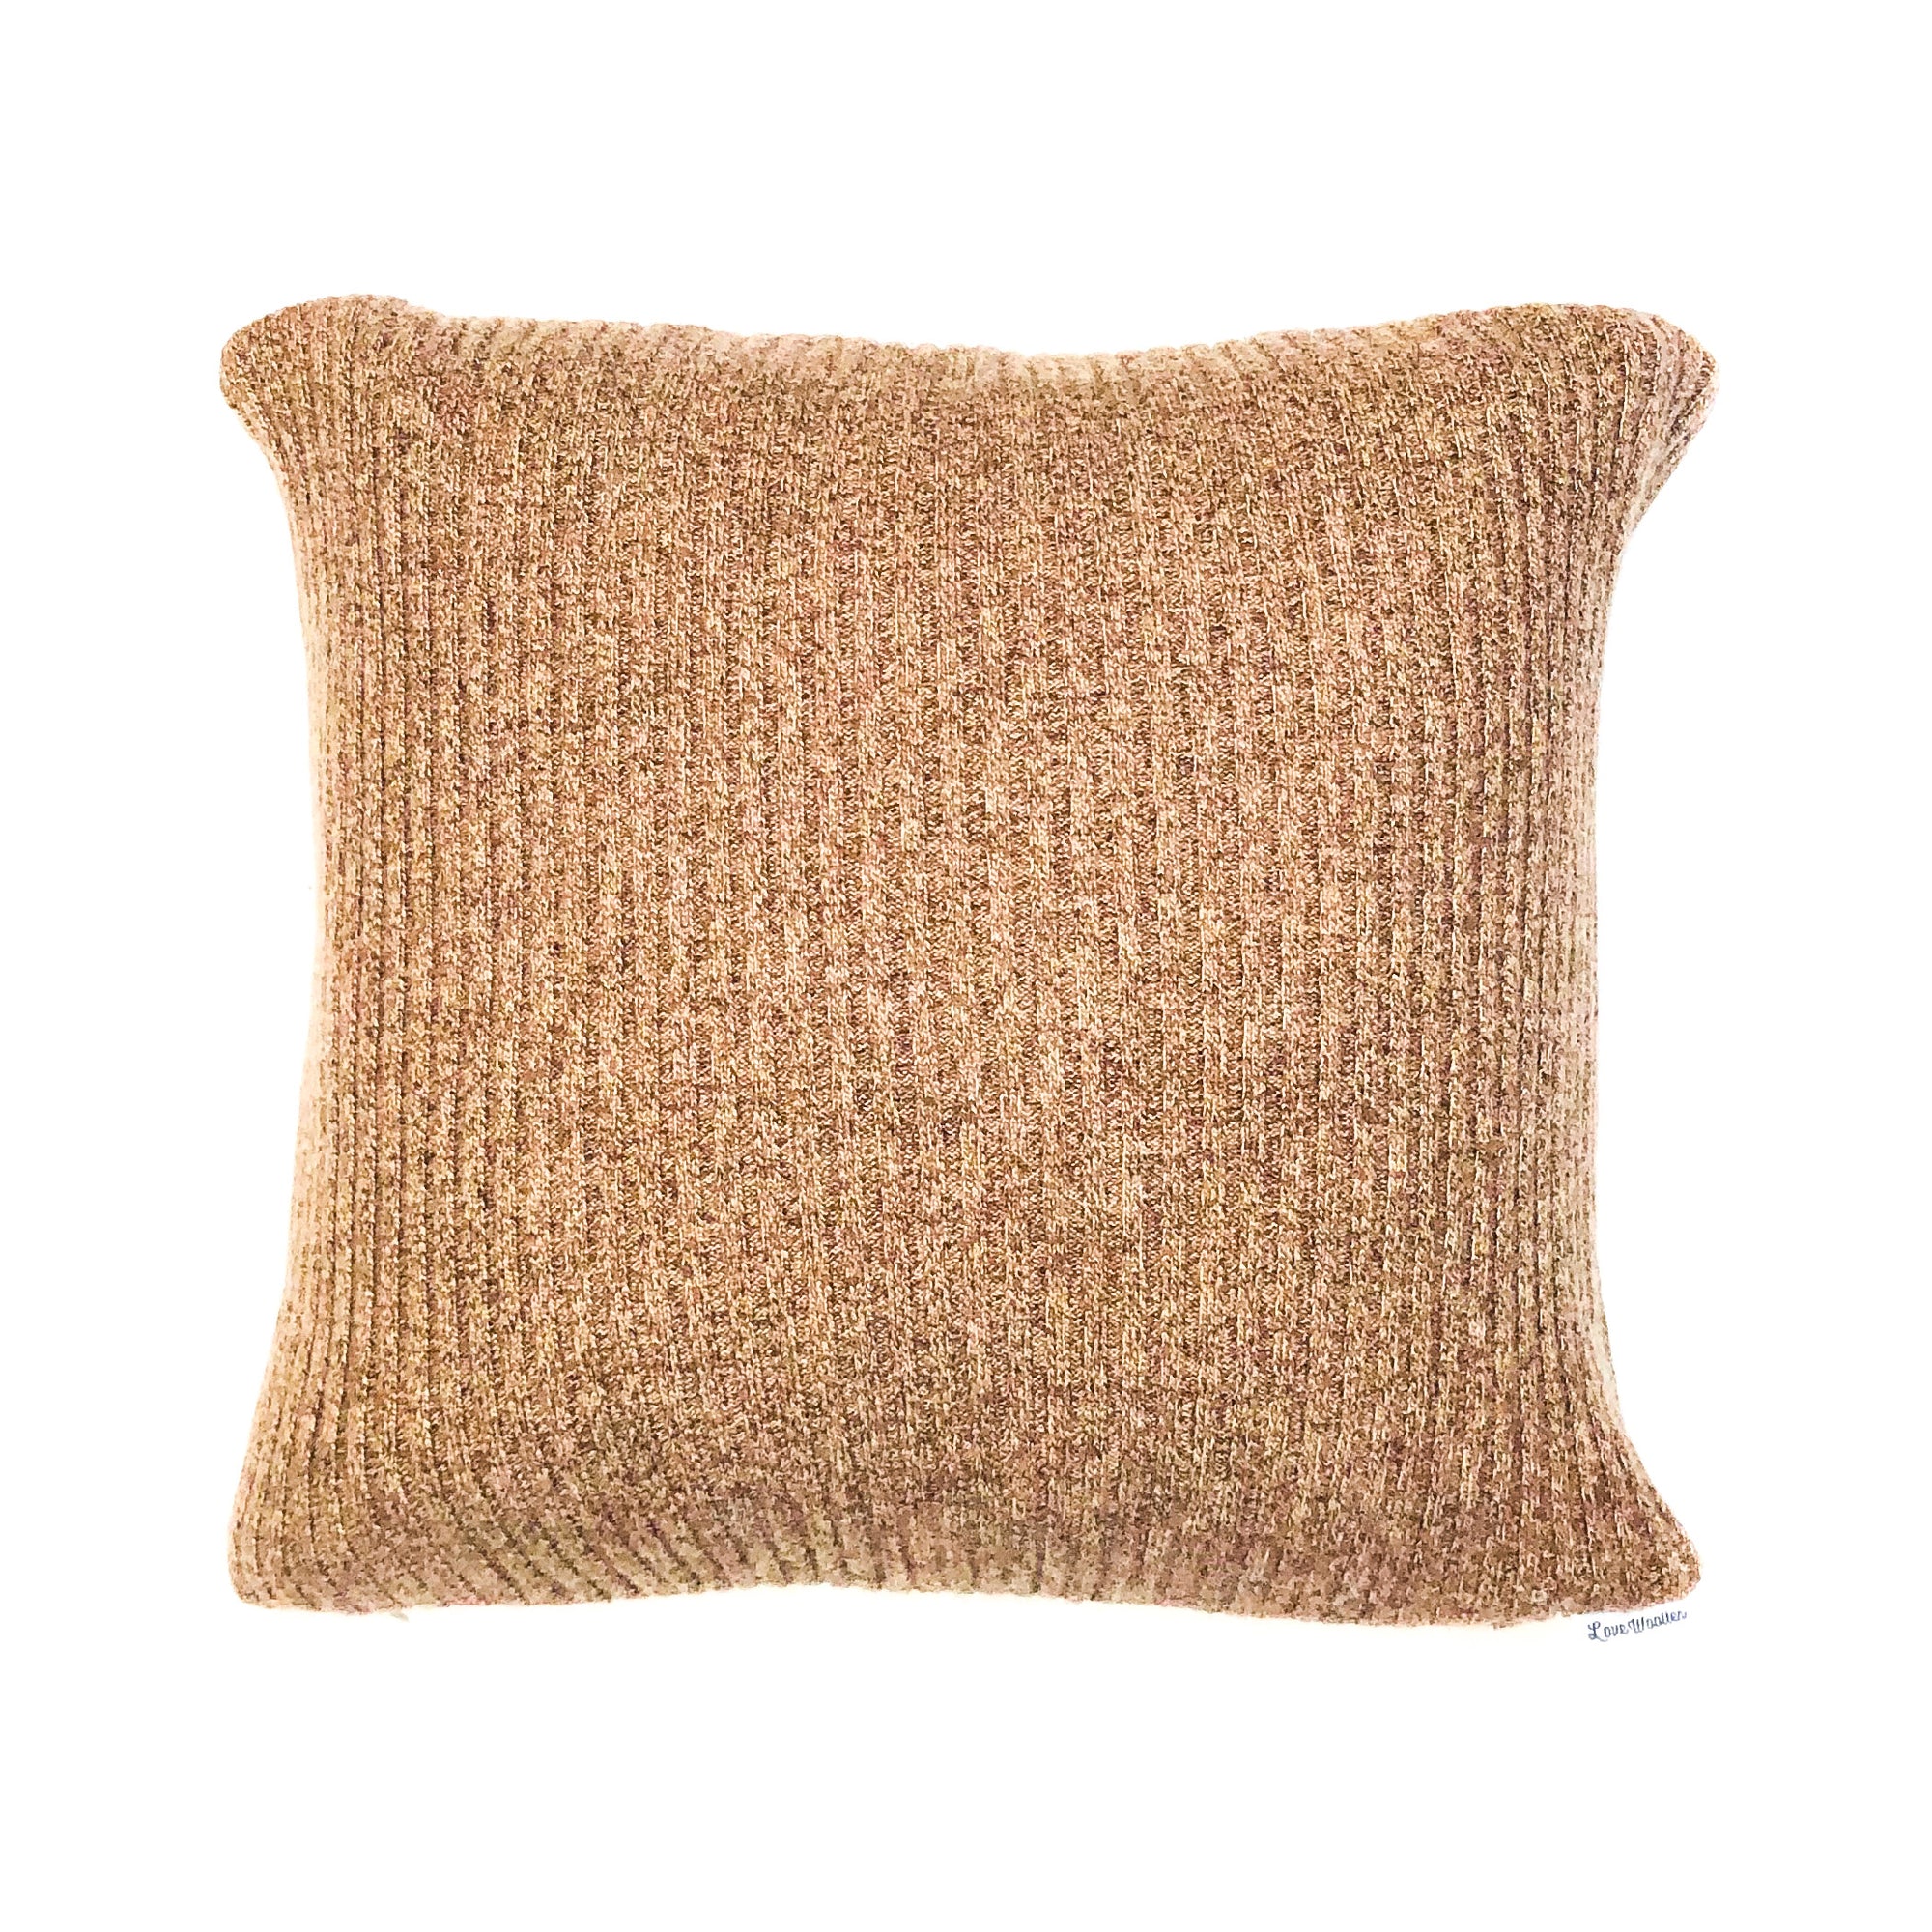 12 x 12 Brown Ribbed Pillow Cover